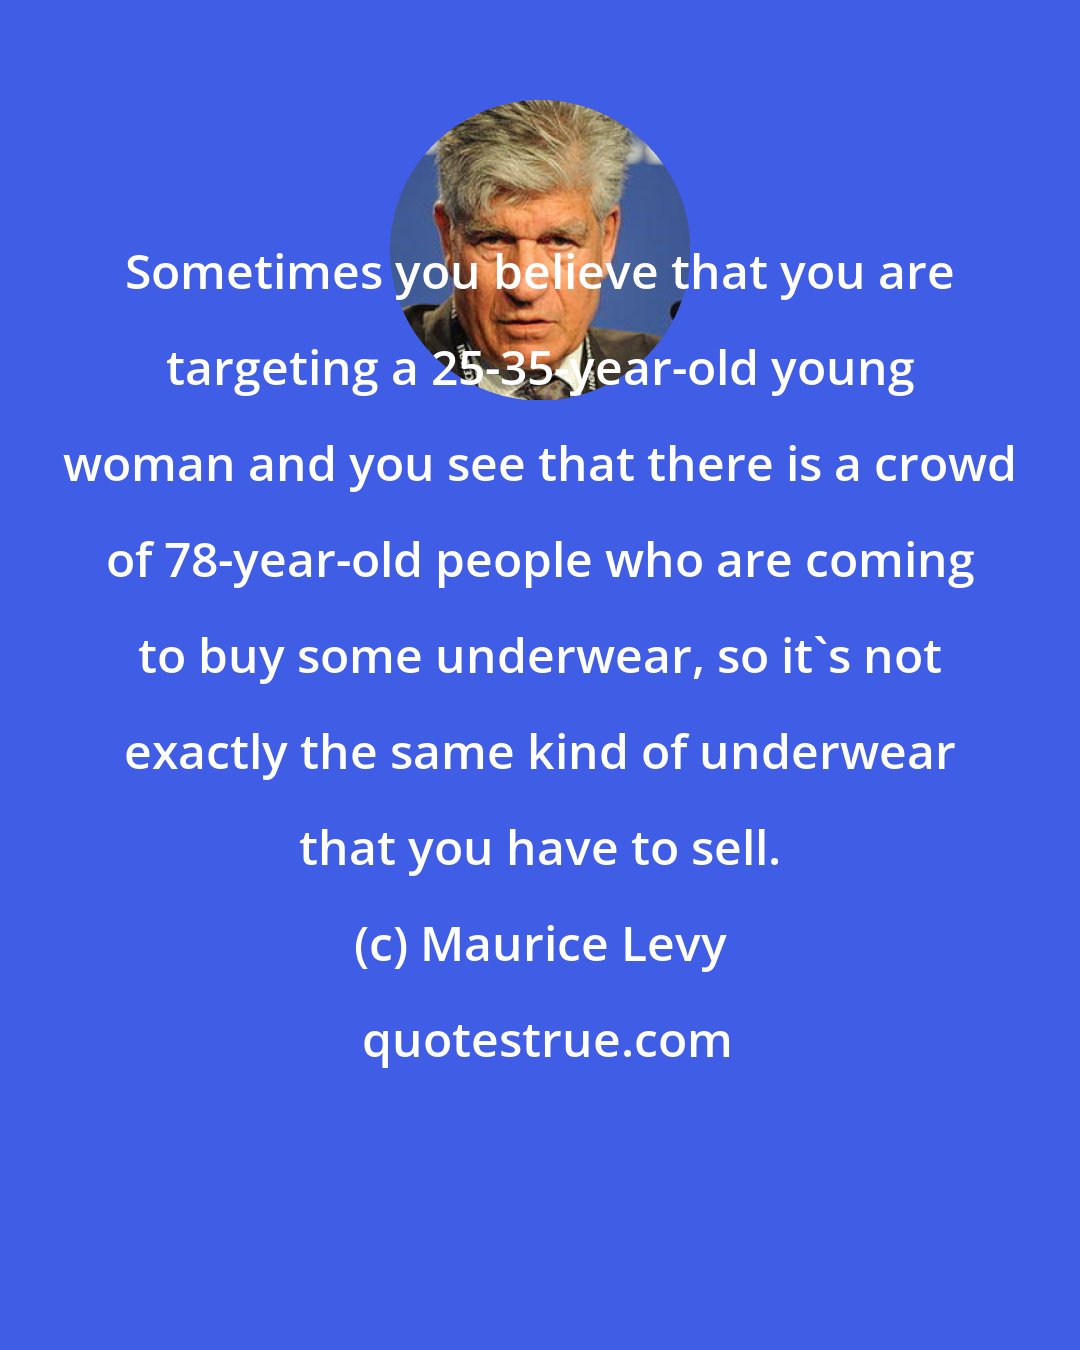 Maurice Levy: Sometimes you believe that you are targeting a 25-35-year-old young woman and you see that there is a crowd of 78-year-old people who are coming to buy some underwear, so it's not exactly the same kind of underwear that you have to sell.